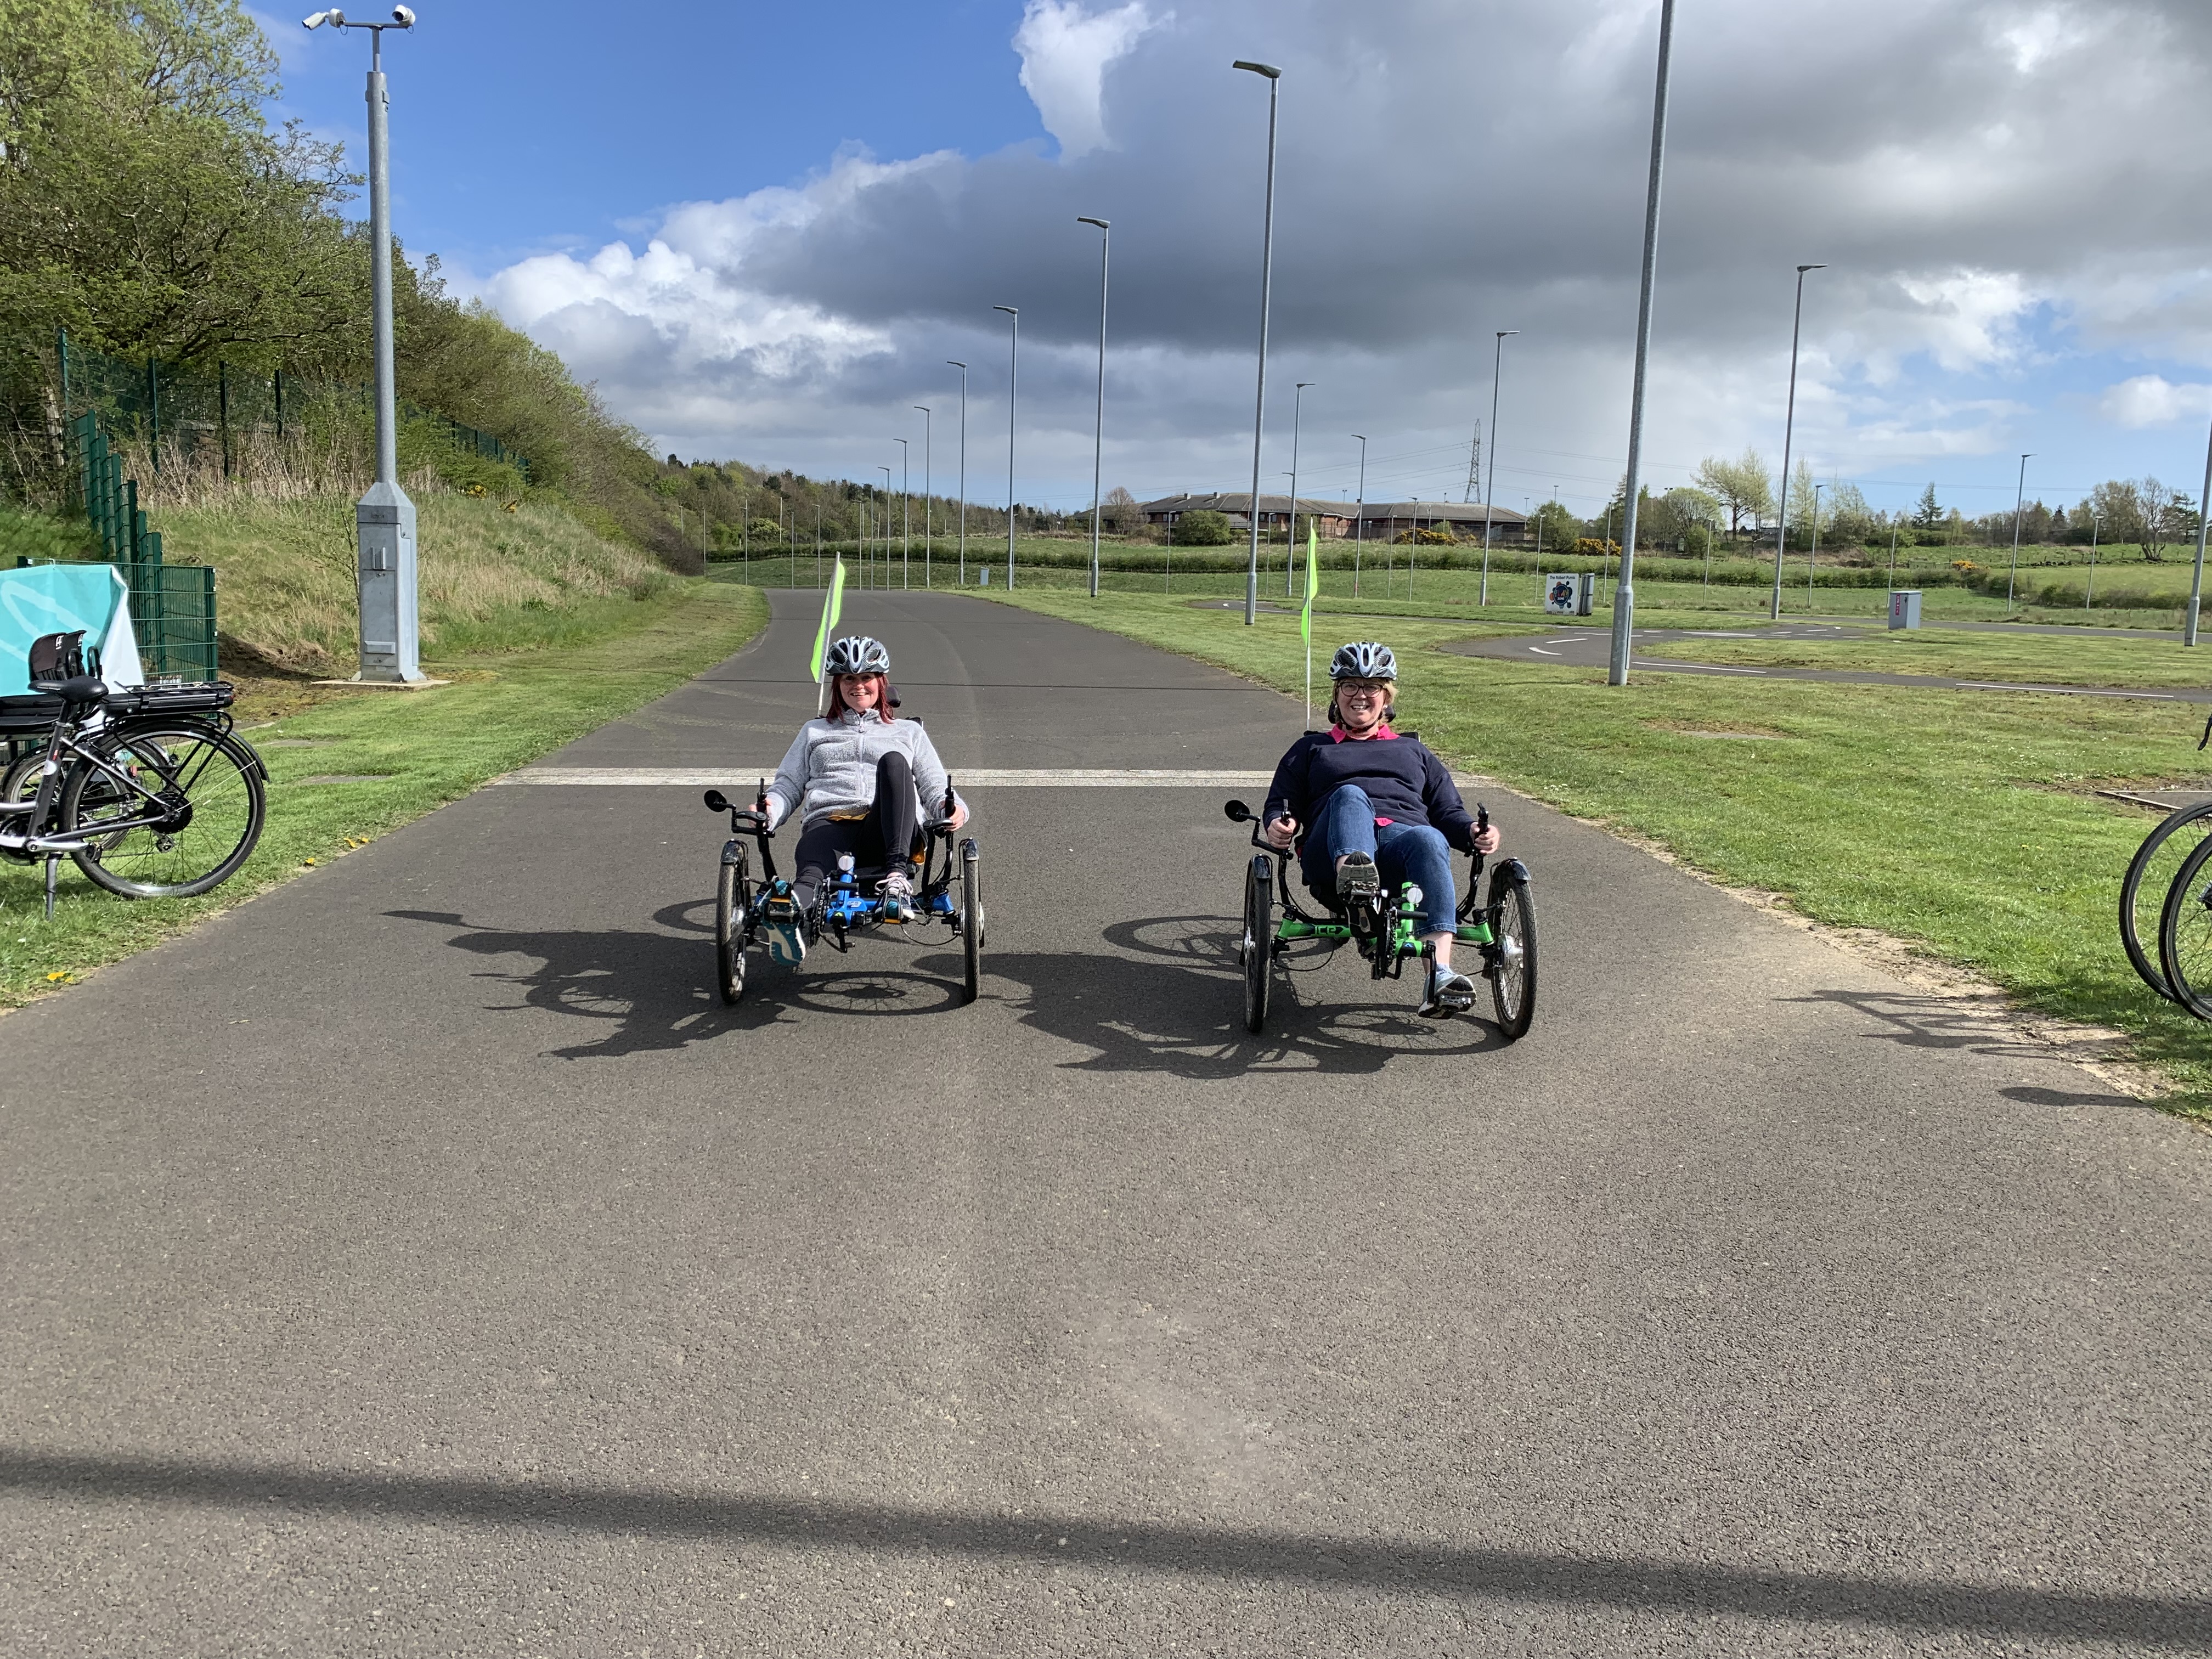 Trying adaptive bikes at Bikeability CPD event at Fife Cycle Park